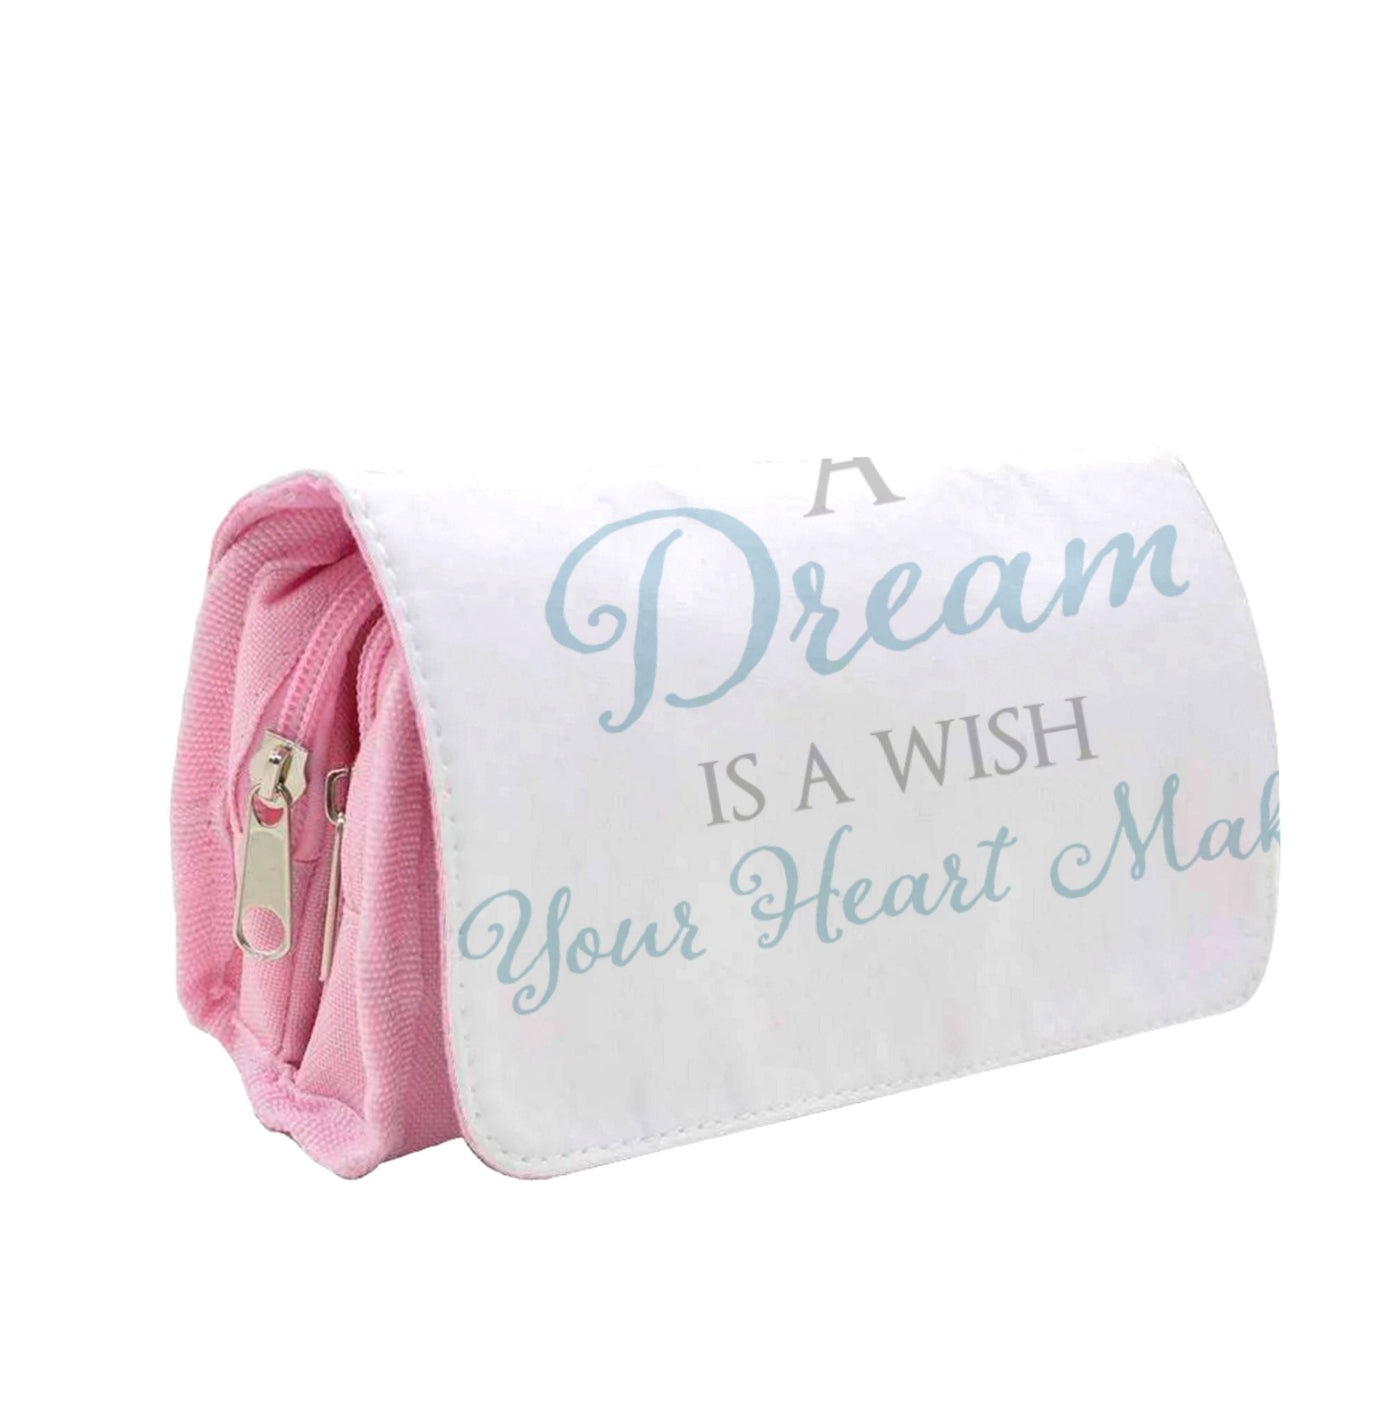 A Dream Is A Wish Your Heart Makes - Disney Pencil Case